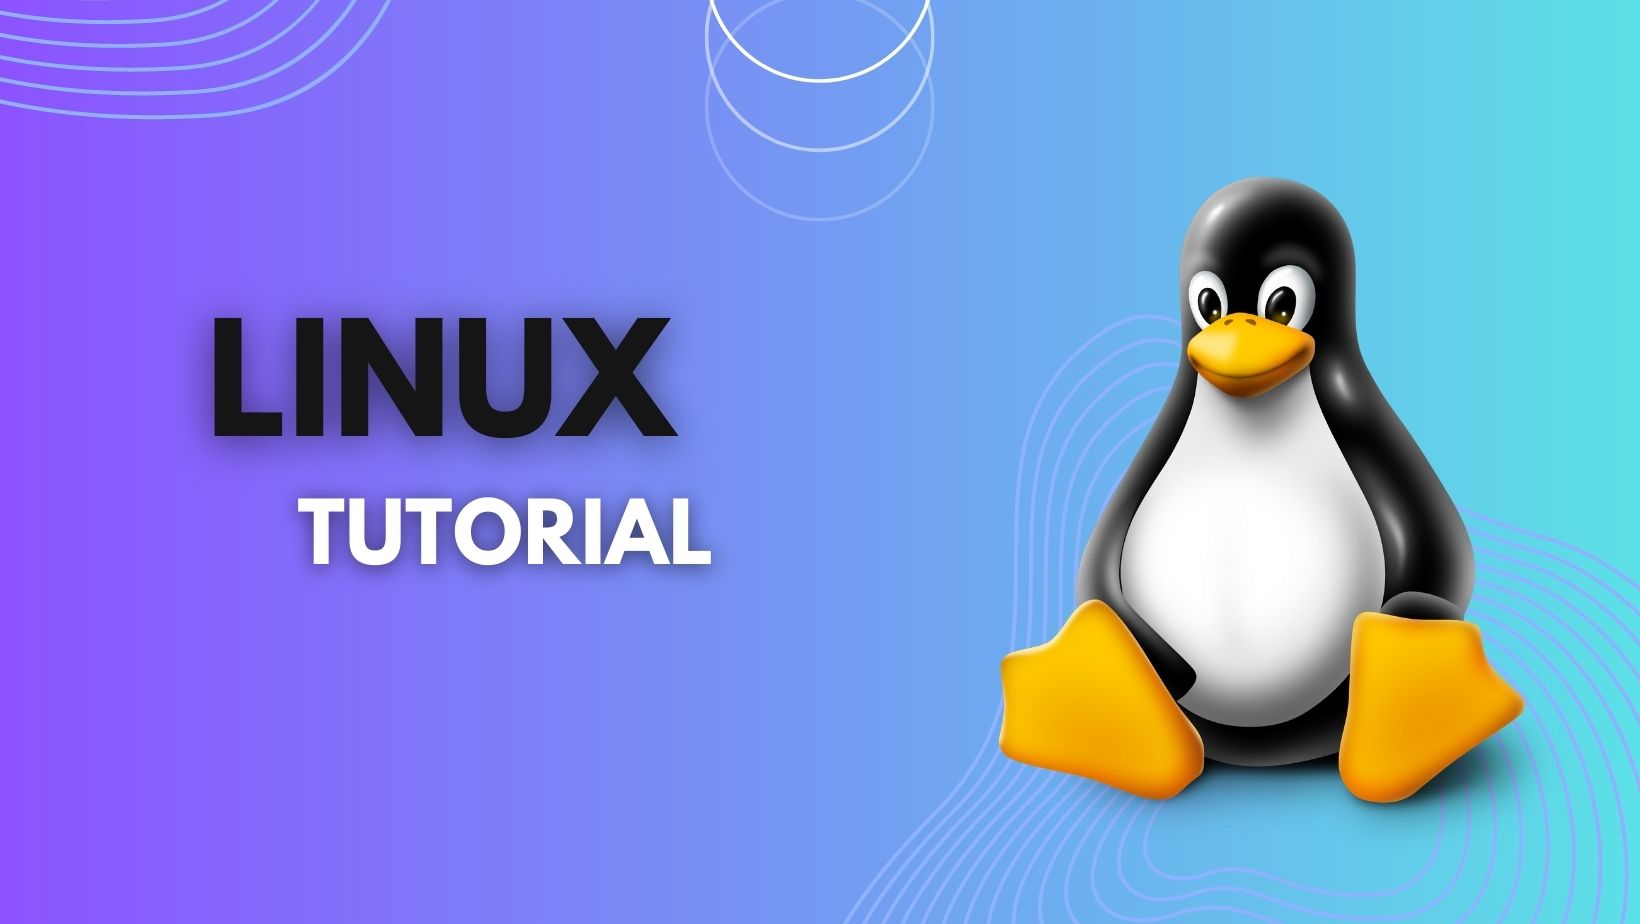 Linux Tutorial with some important commands for Linux